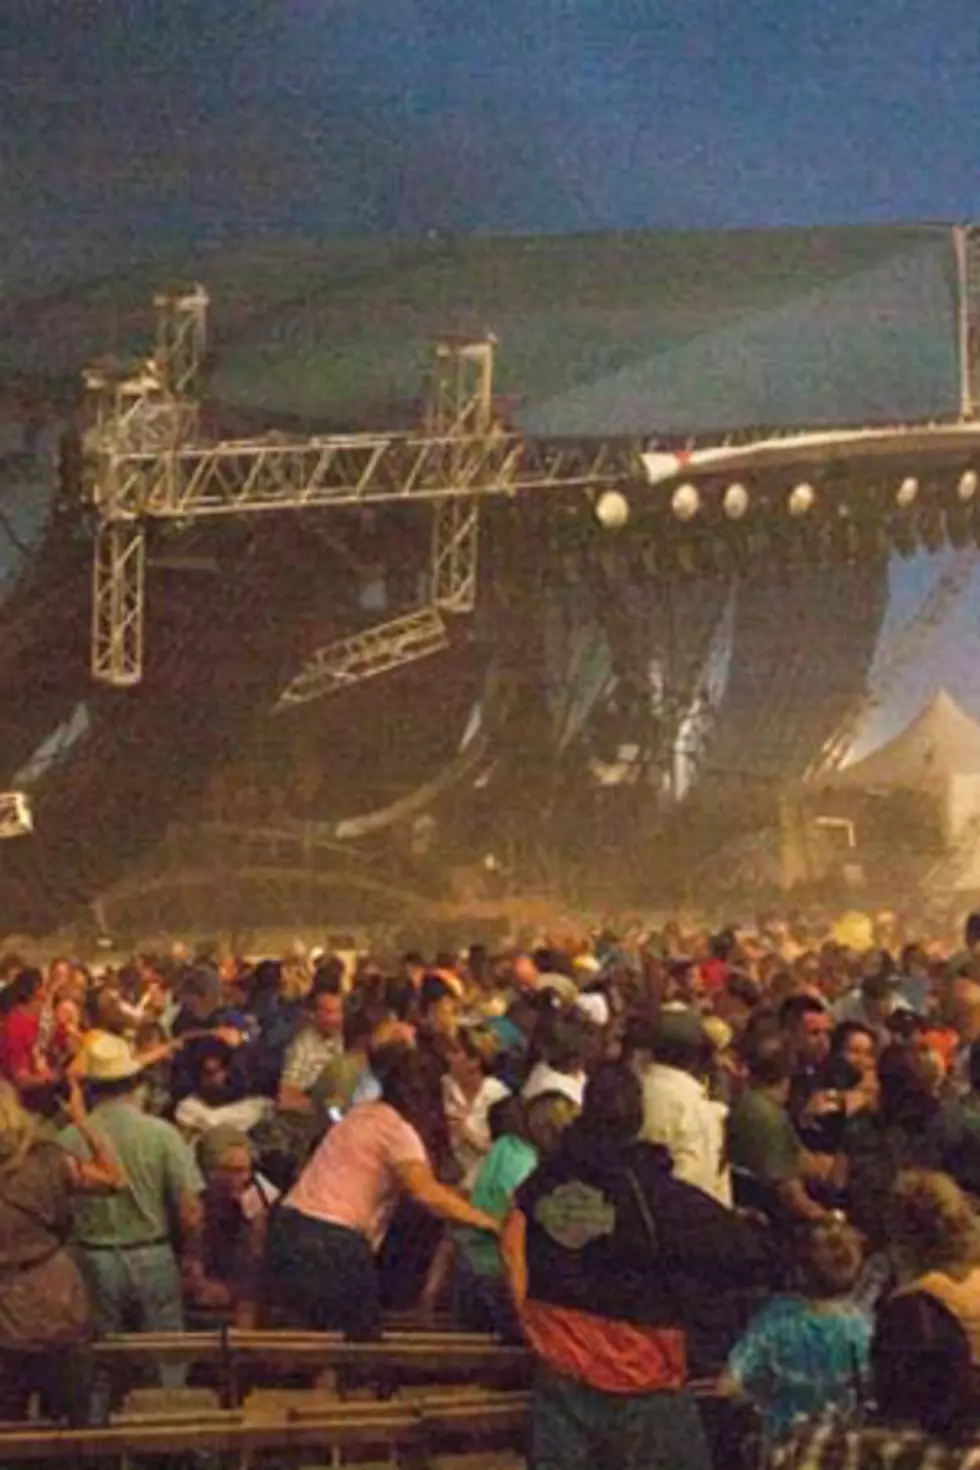 Top 10 News Stories of 2011: Stage Collapses at Indiana State Fair Prior to Sugarland Concert